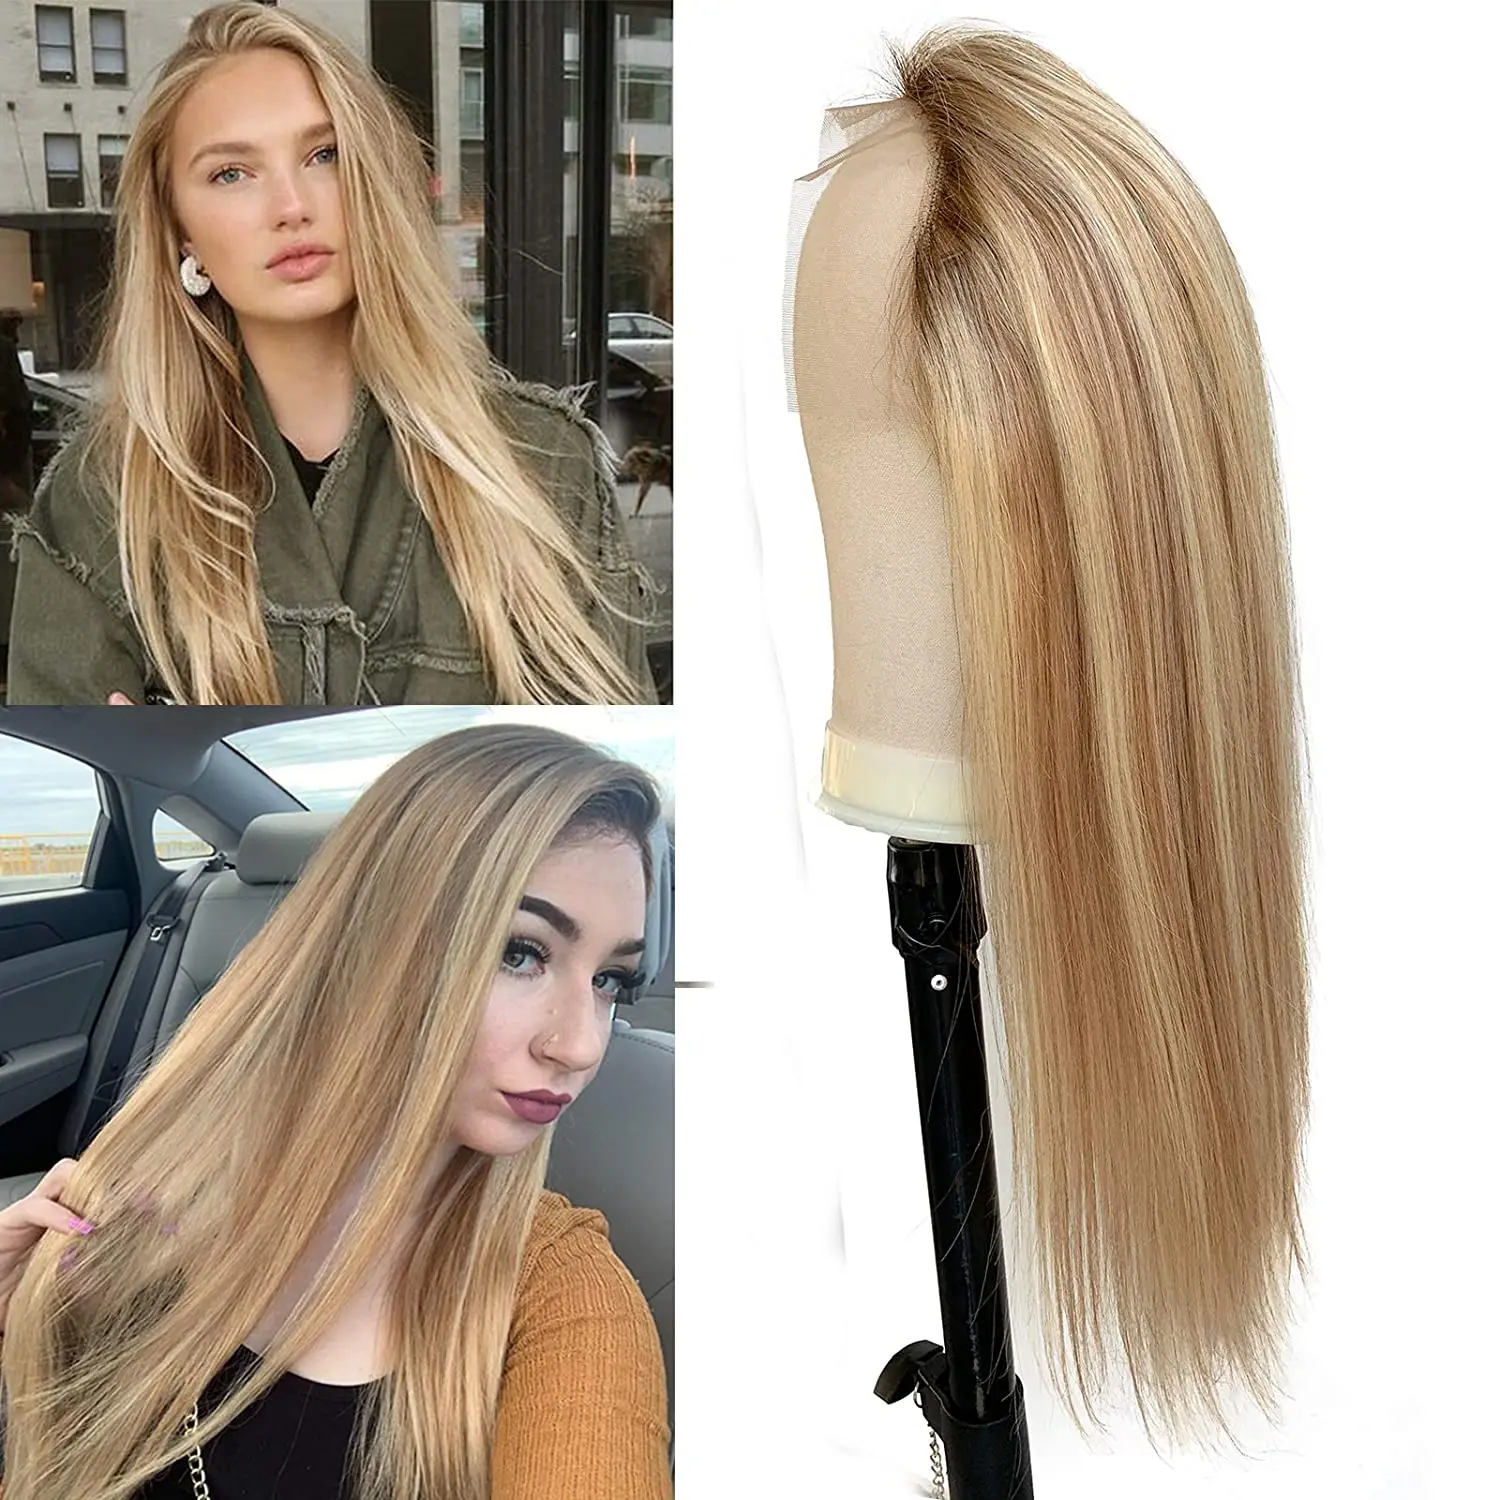 Toysww Straight Clip in Human Hair Extensions Machine Made Remy 6PCSset  Real European Natural Hair - AliExpress